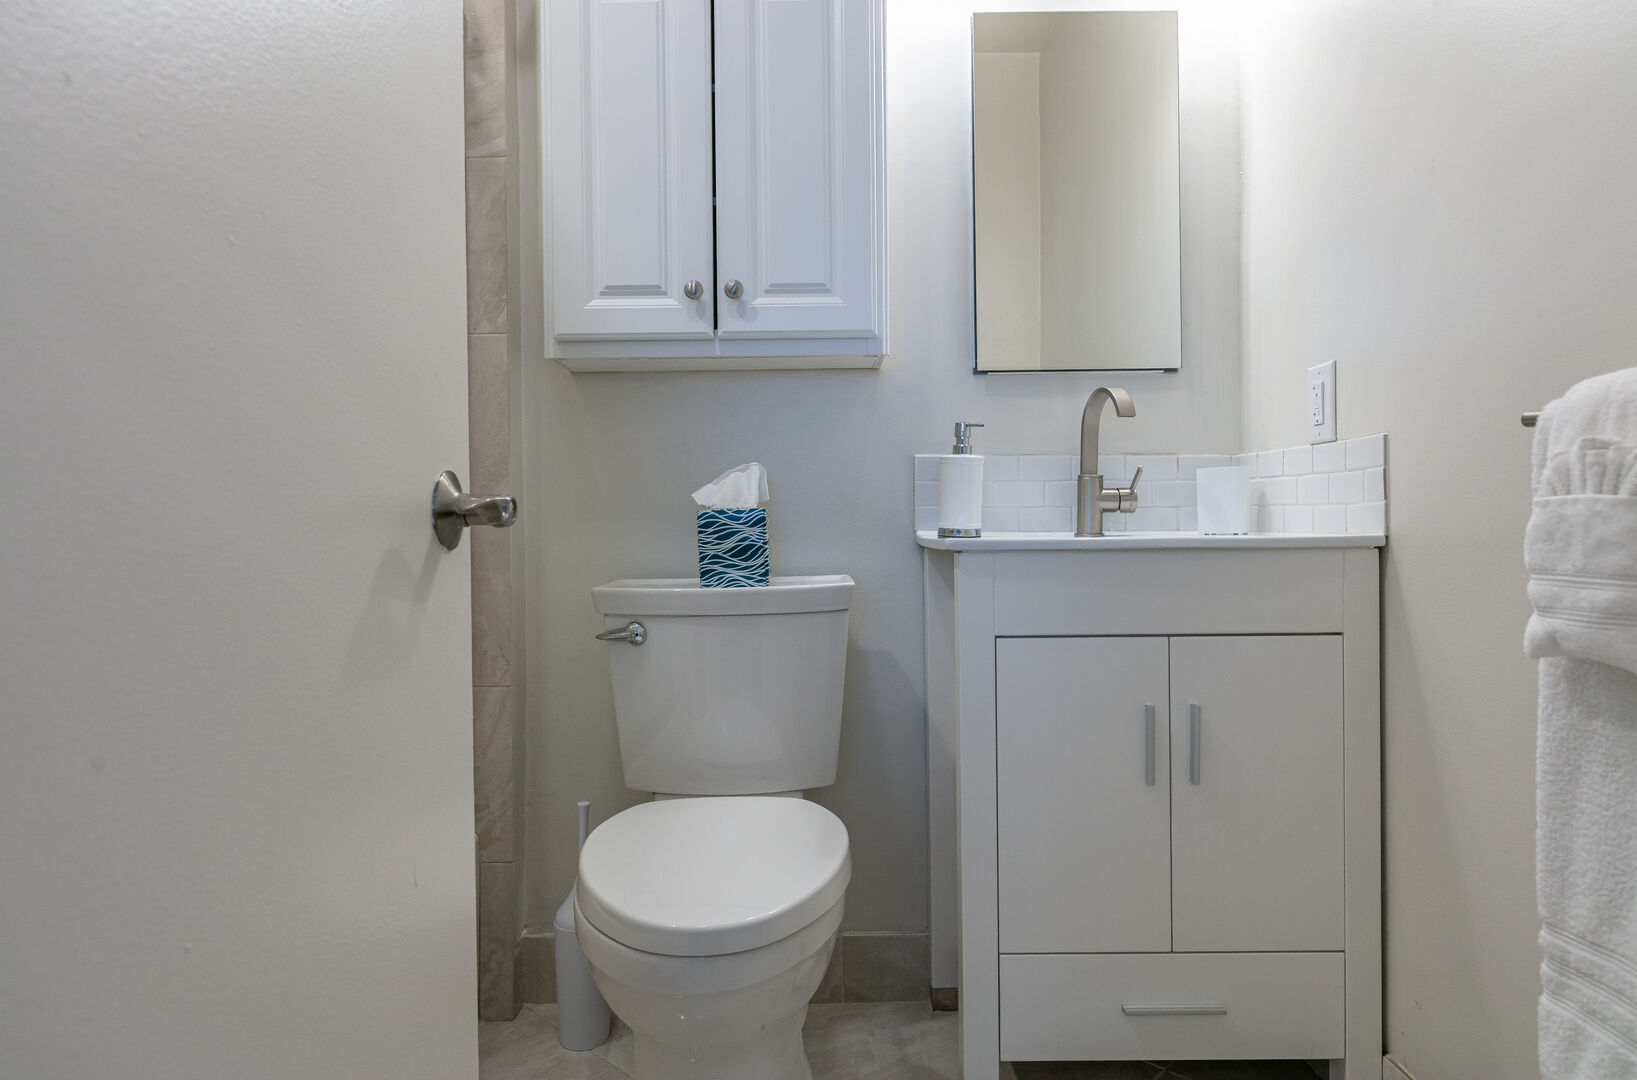 The master bathroom, much like the rest of the condo, is small but has all the same amenities as larger bathrooms